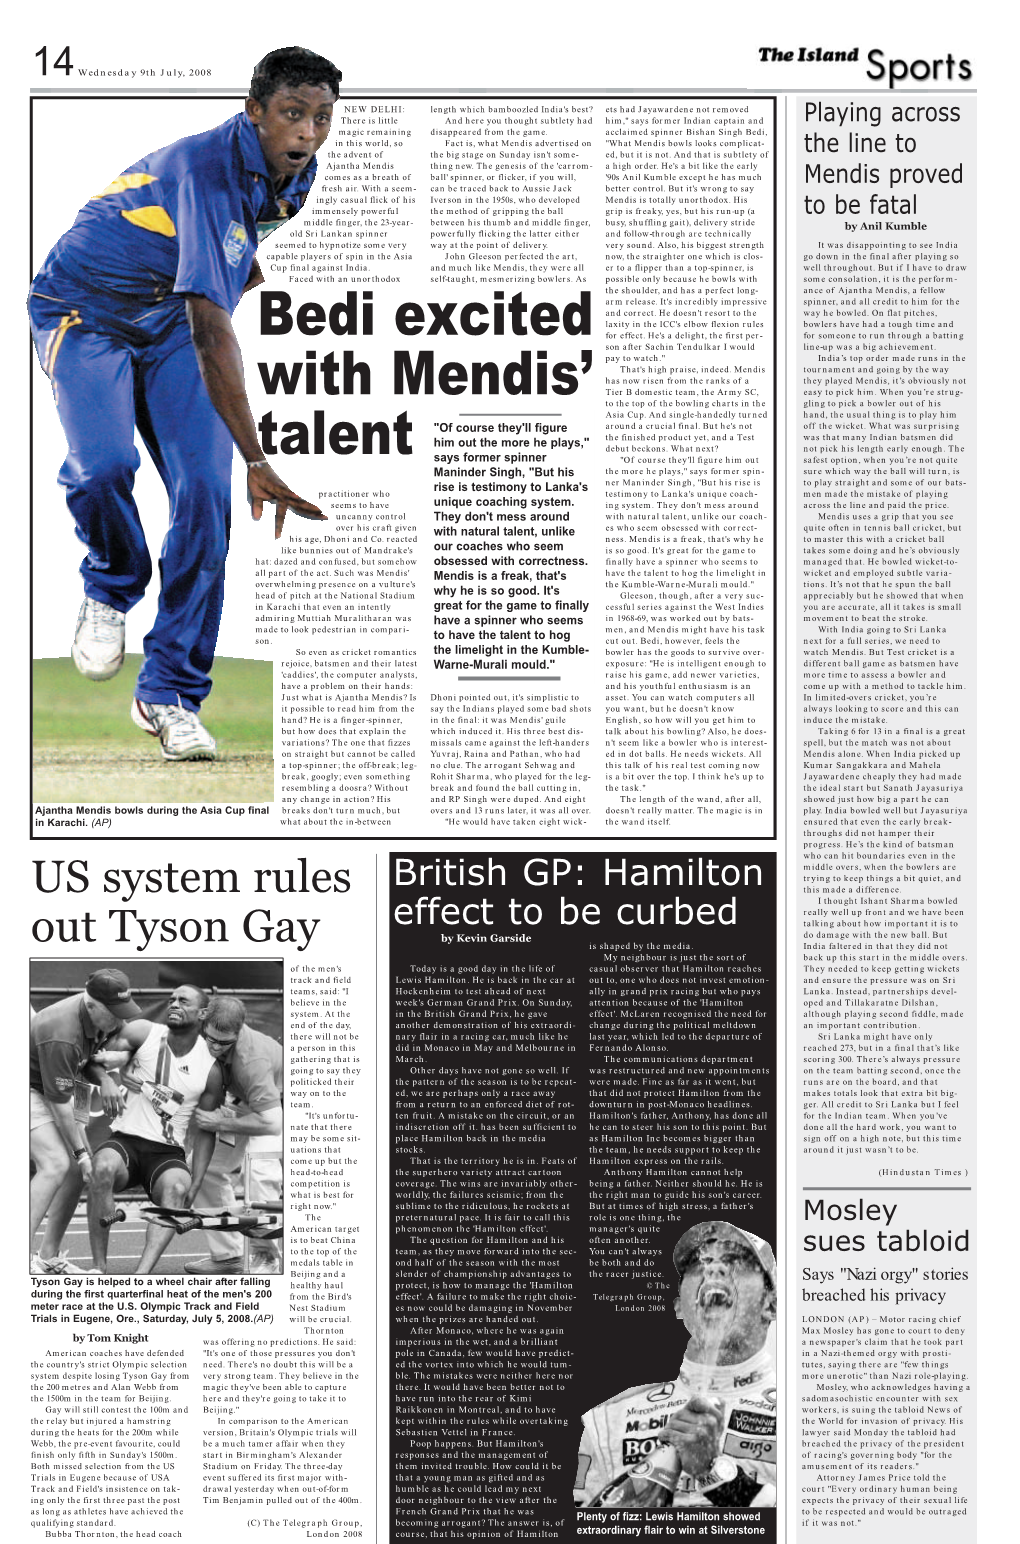 Bedi Excited with Mendis' Talent